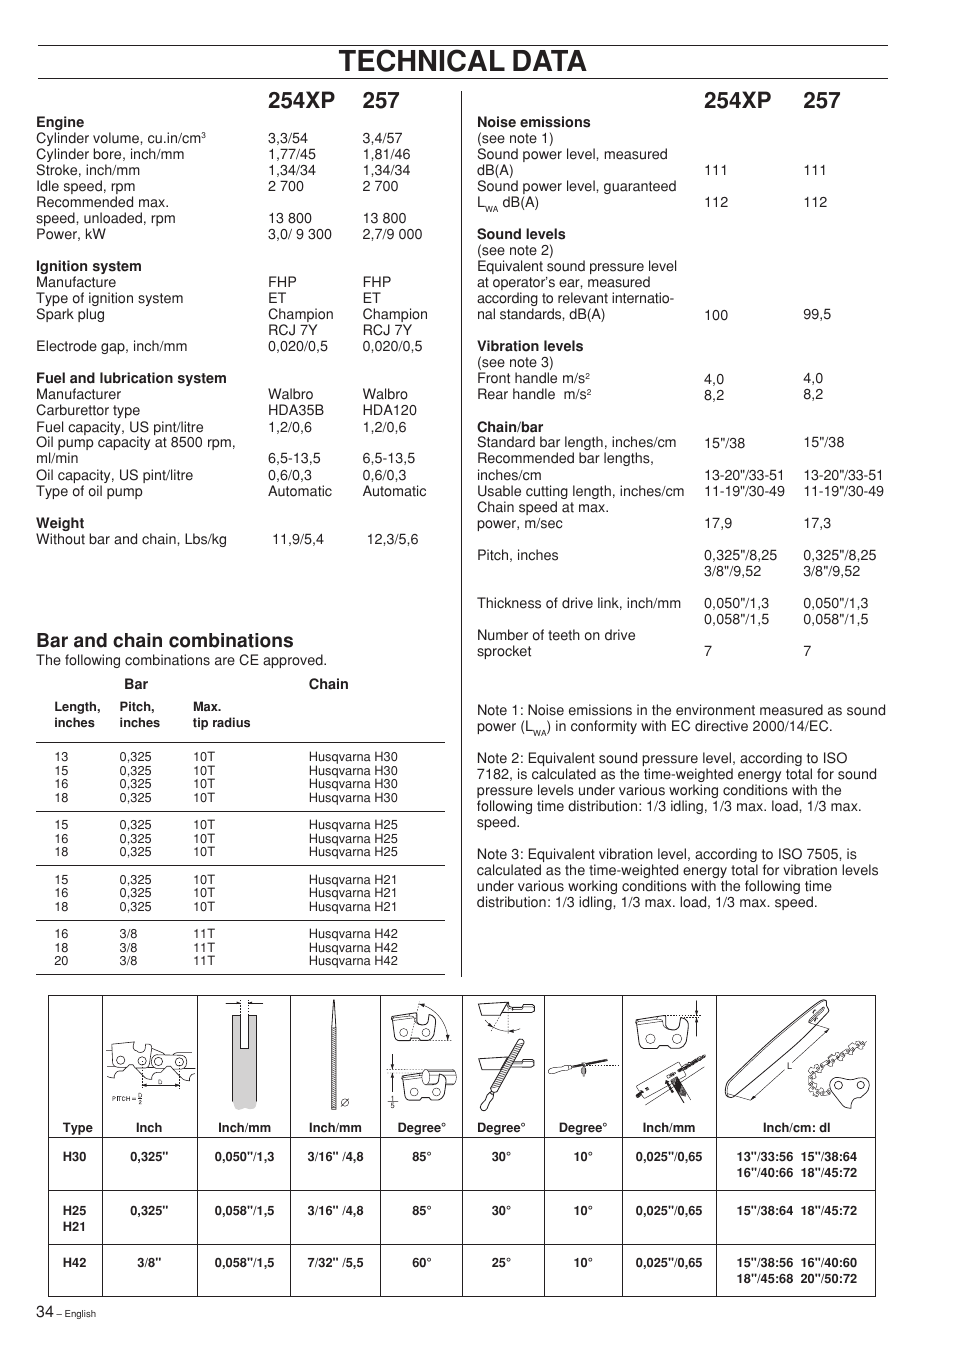 Technical data, Bar and chain combinations, 254xp | Husqvarna 354XP User  Manual | Page 34 / 40